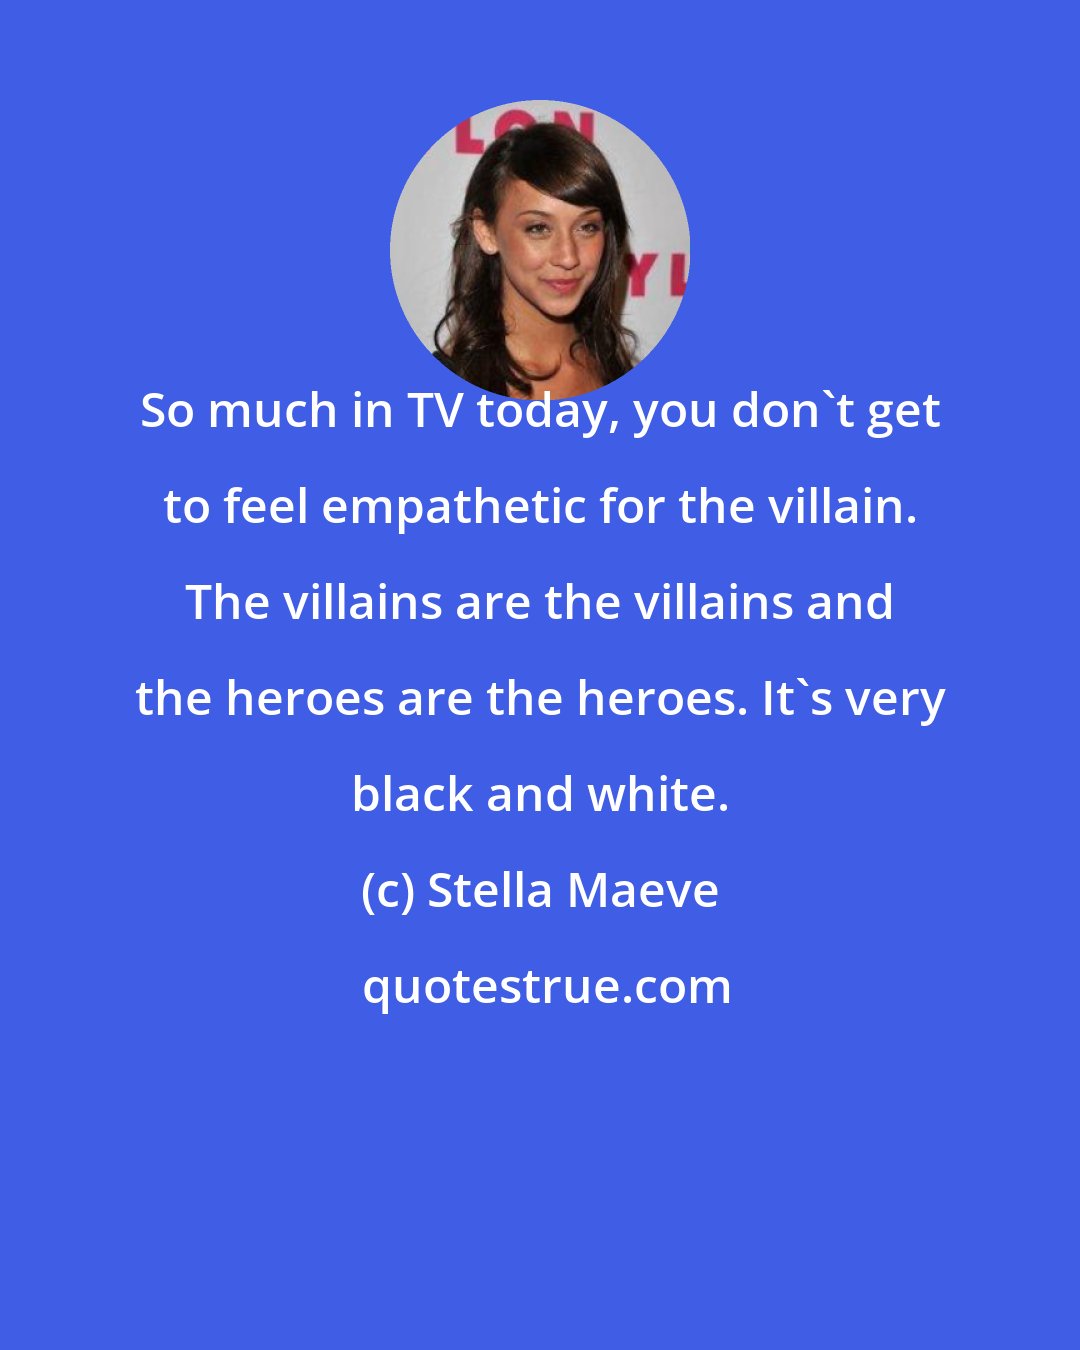 Stella Maeve: So much in TV today, you don't get to feel empathetic for the villain. The villains are the villains and the heroes are the heroes. It's very black and white.